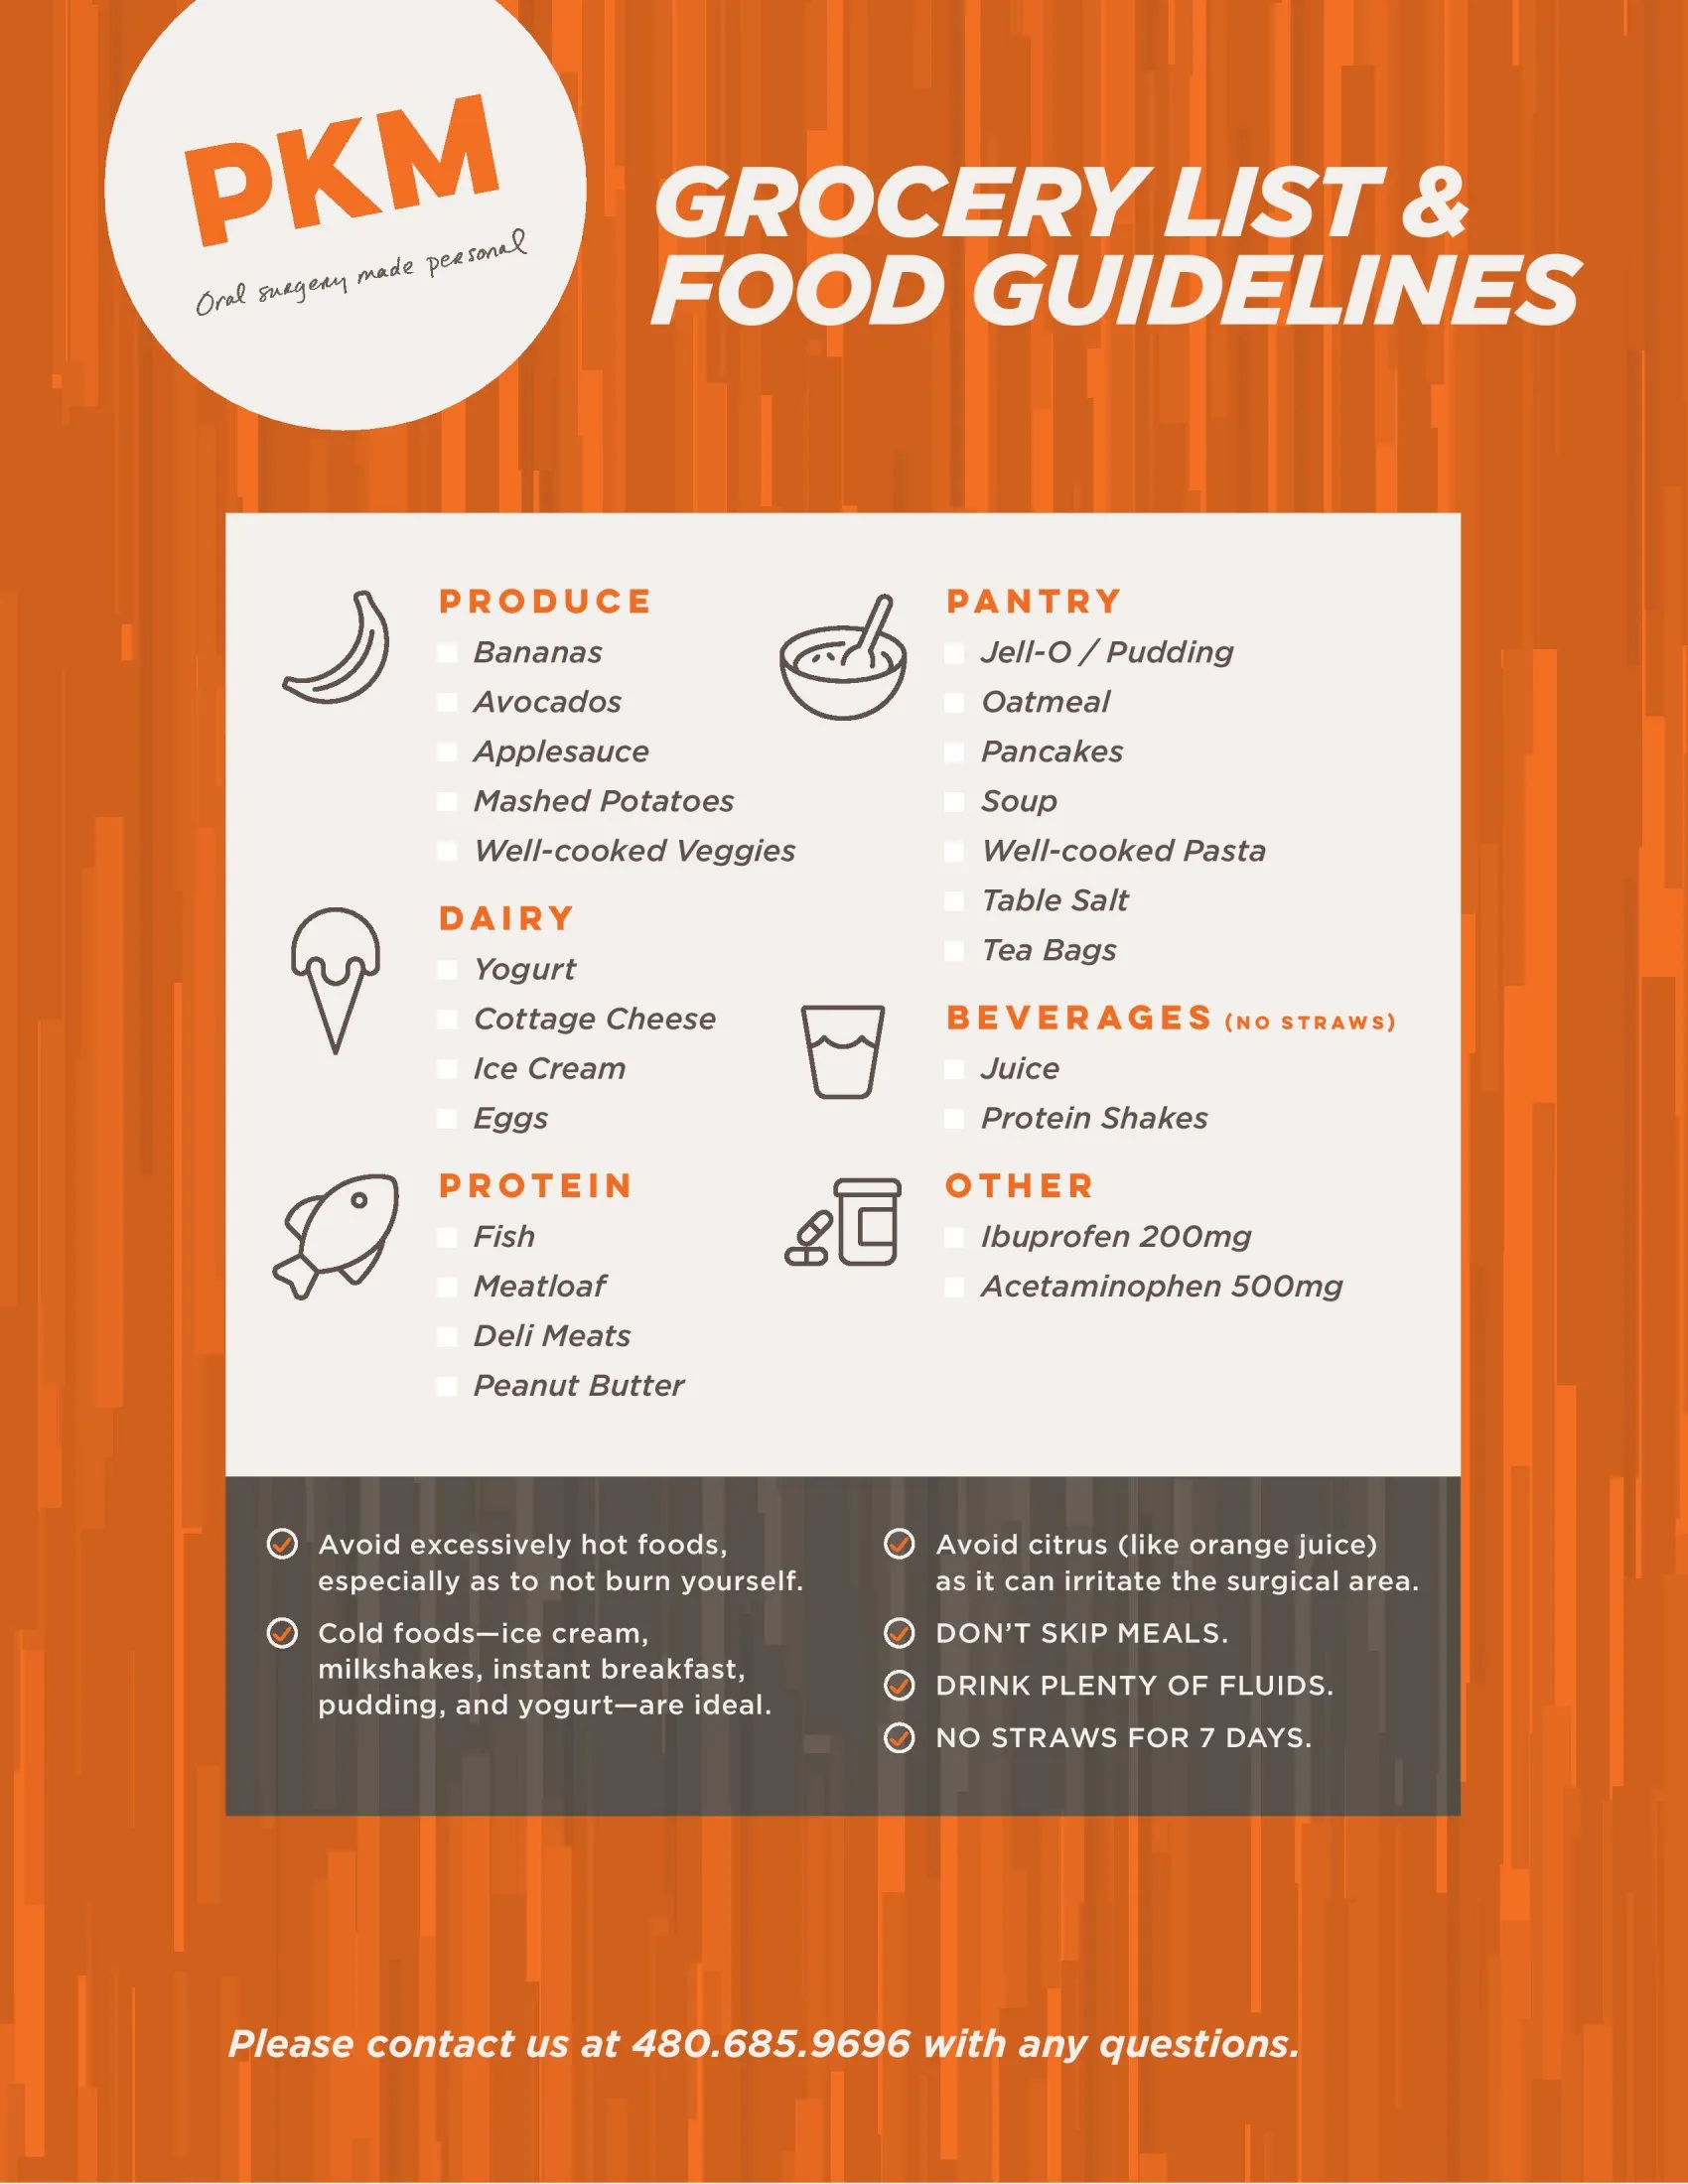 Grocery List & Food Guidelines infographic